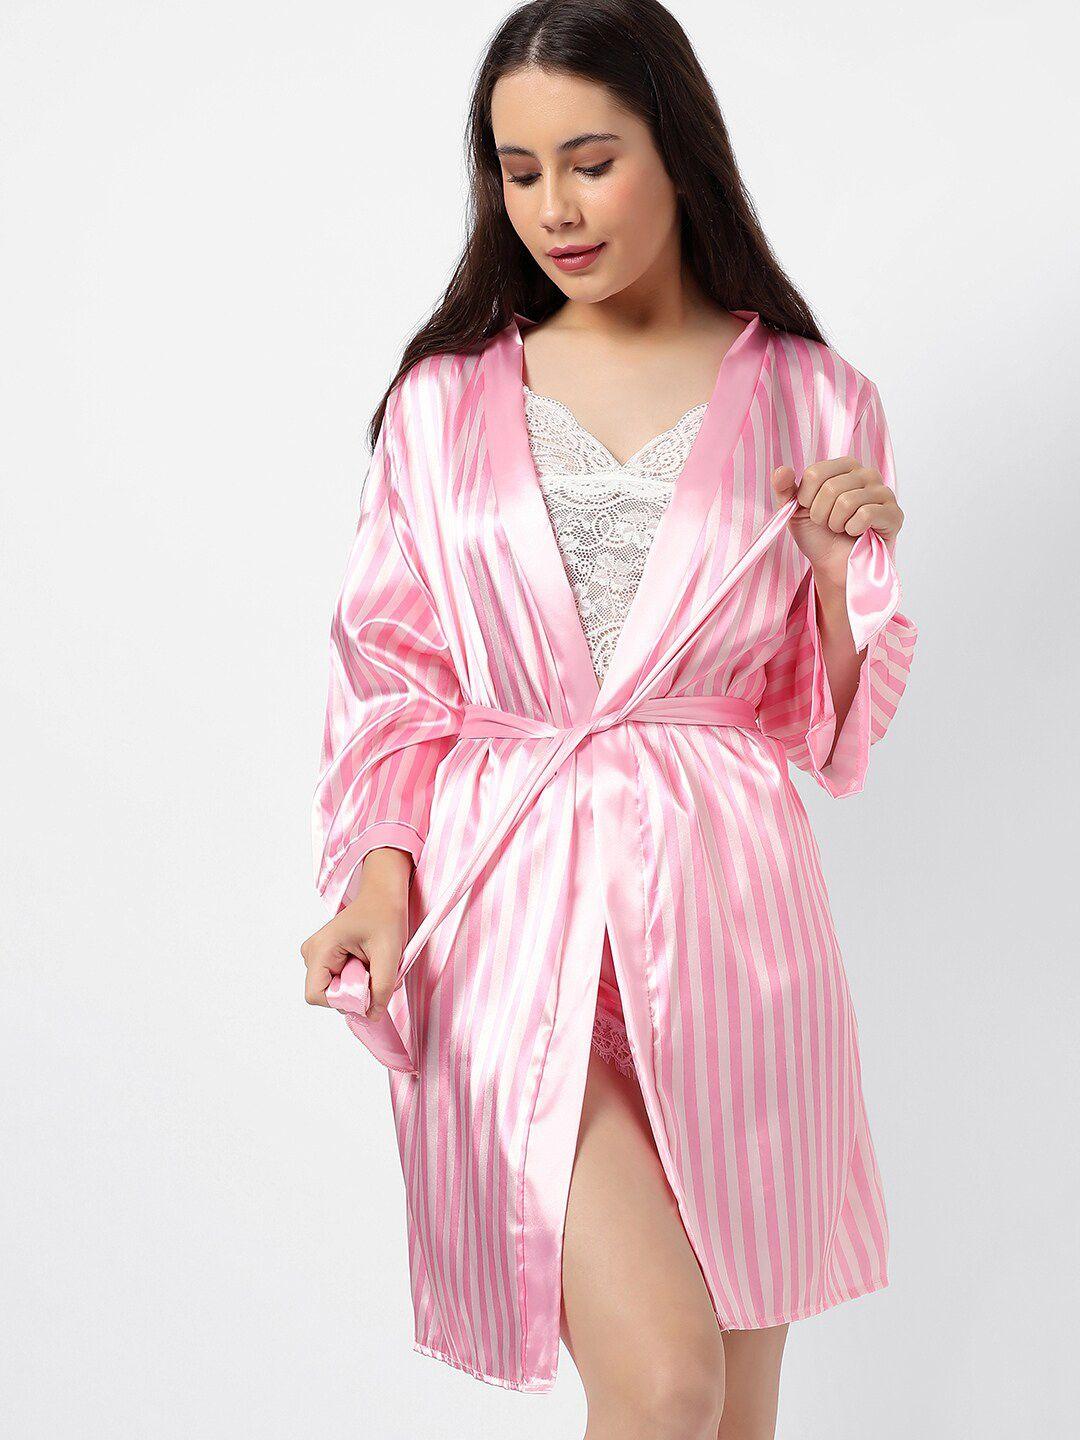 haute sauce by campus sutra women white & pink printed night suit